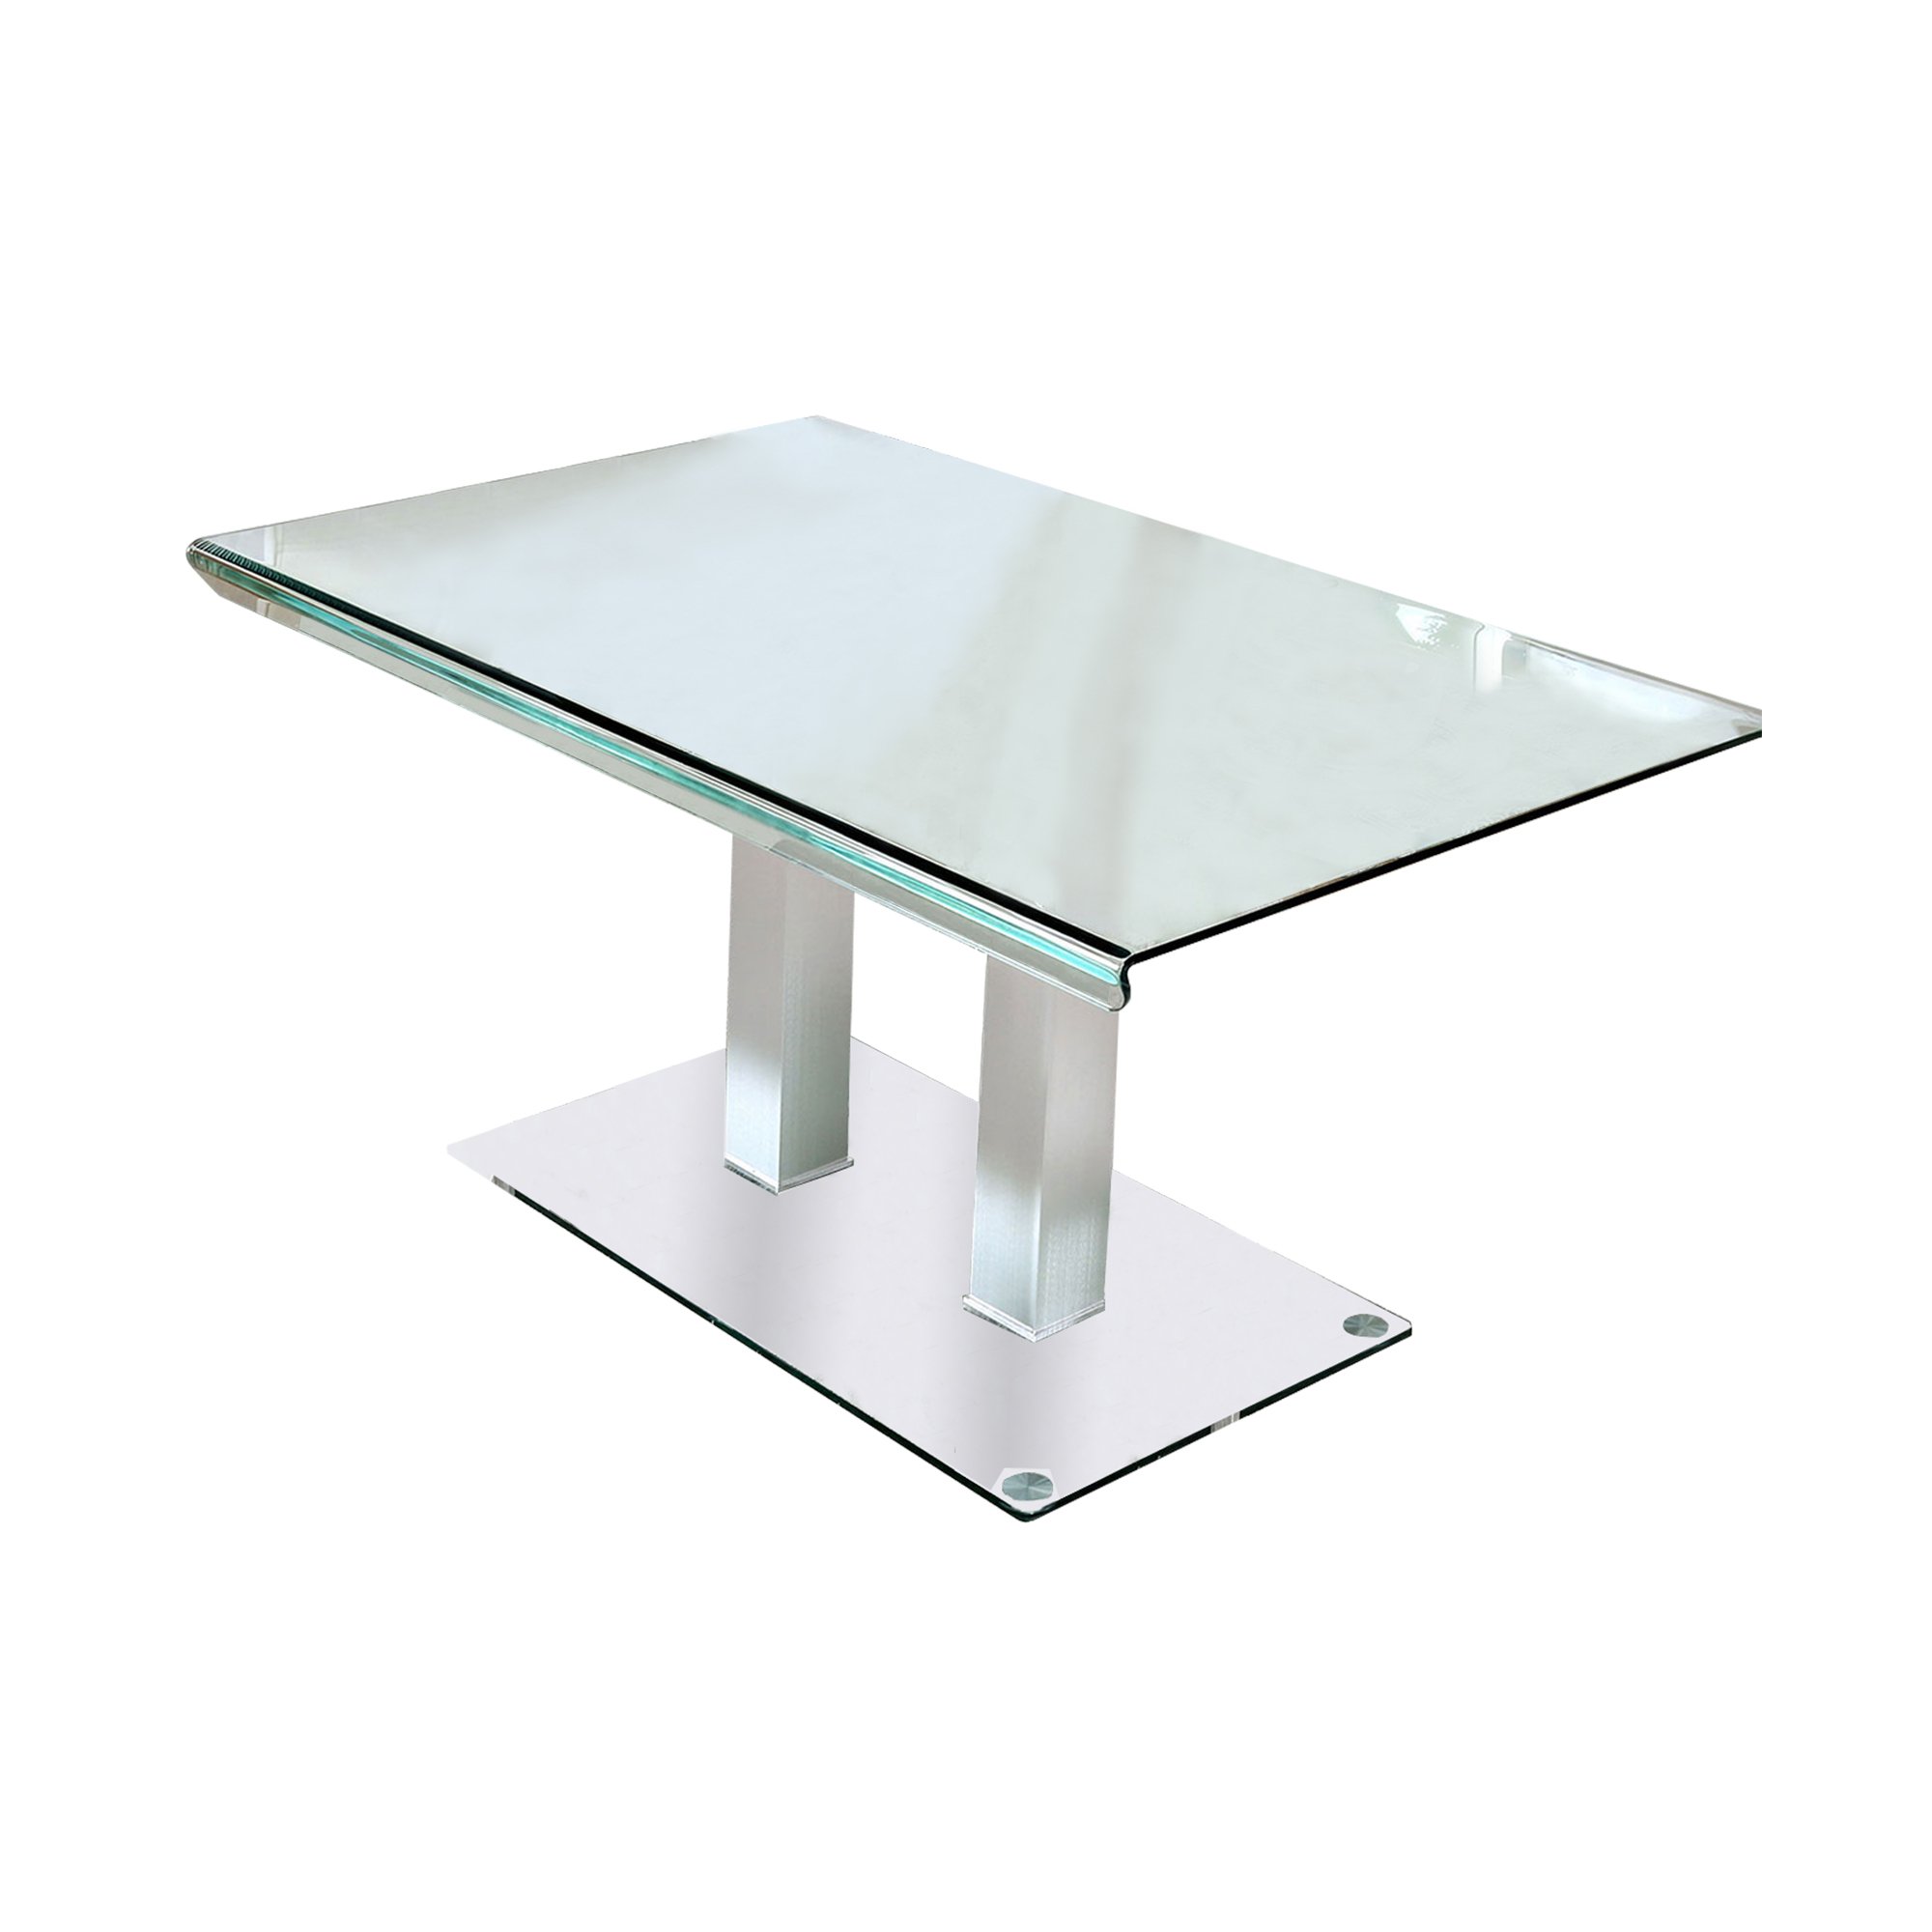 Metal And Glass Dining Table With Dual Post Pedestal Base, Chrome - Saltoro Sherpi